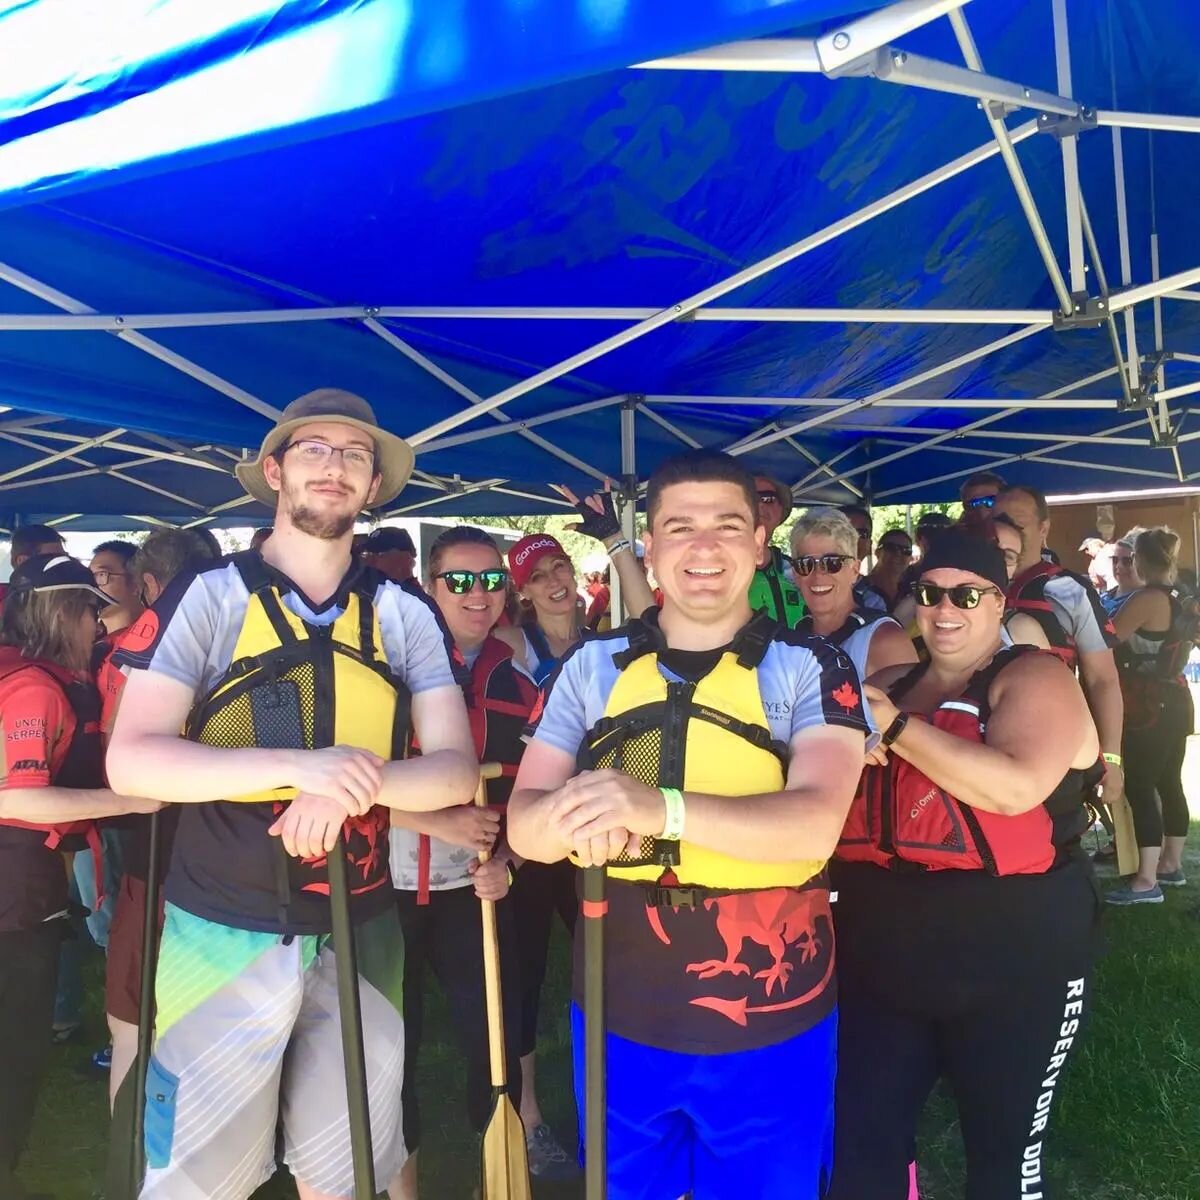 First festival for our newest members, Chris &amp; Adolfo did great! 
.
.
#lethdragonfest #lethdragonfest22 #yycdbs #paddlesupyyc #redeyesdragonboat